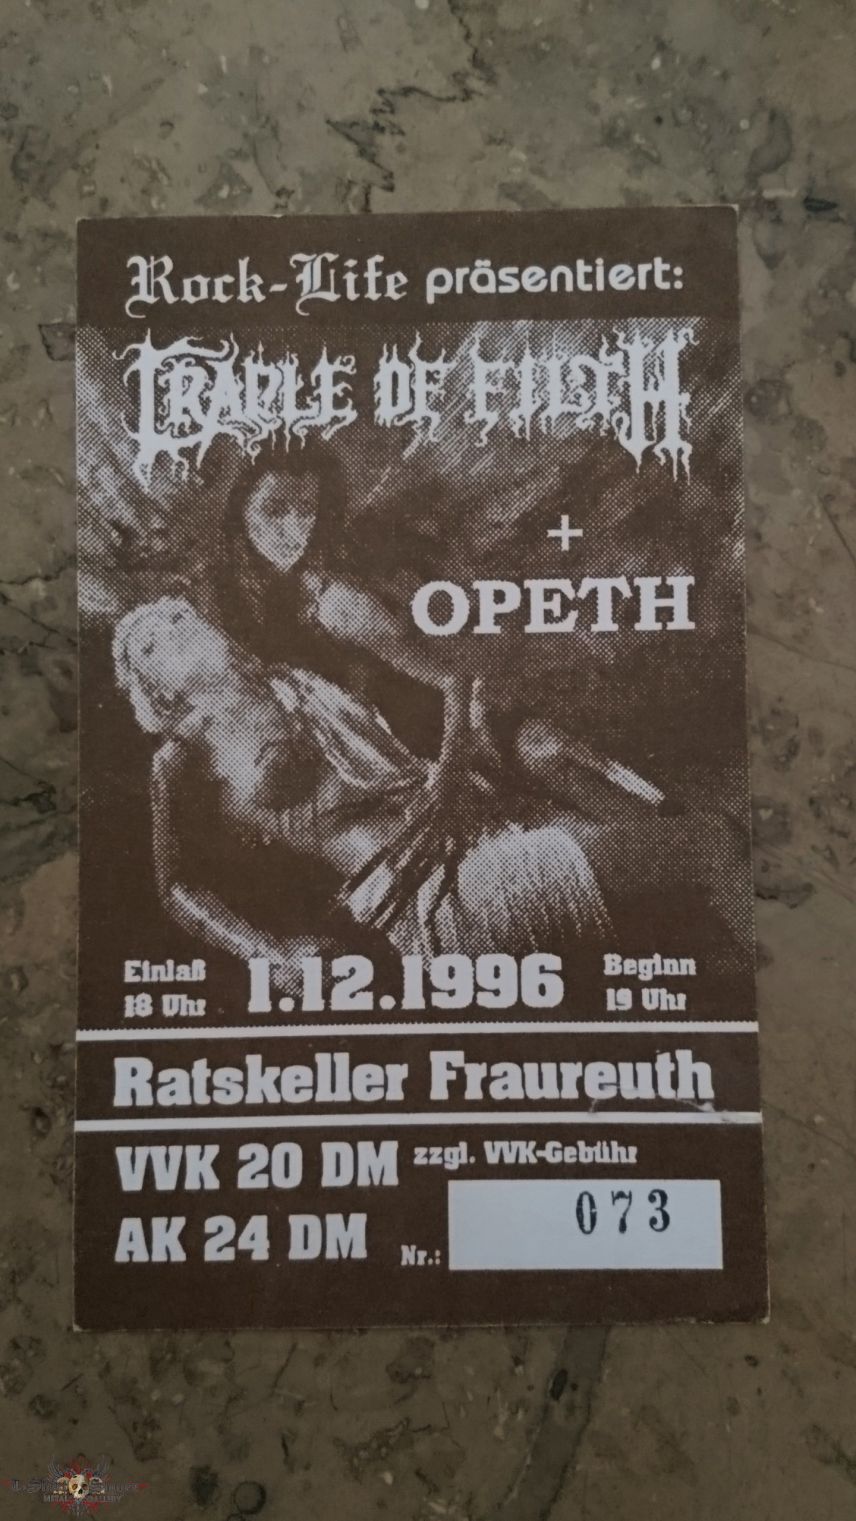 Cradle Of Filth tickets